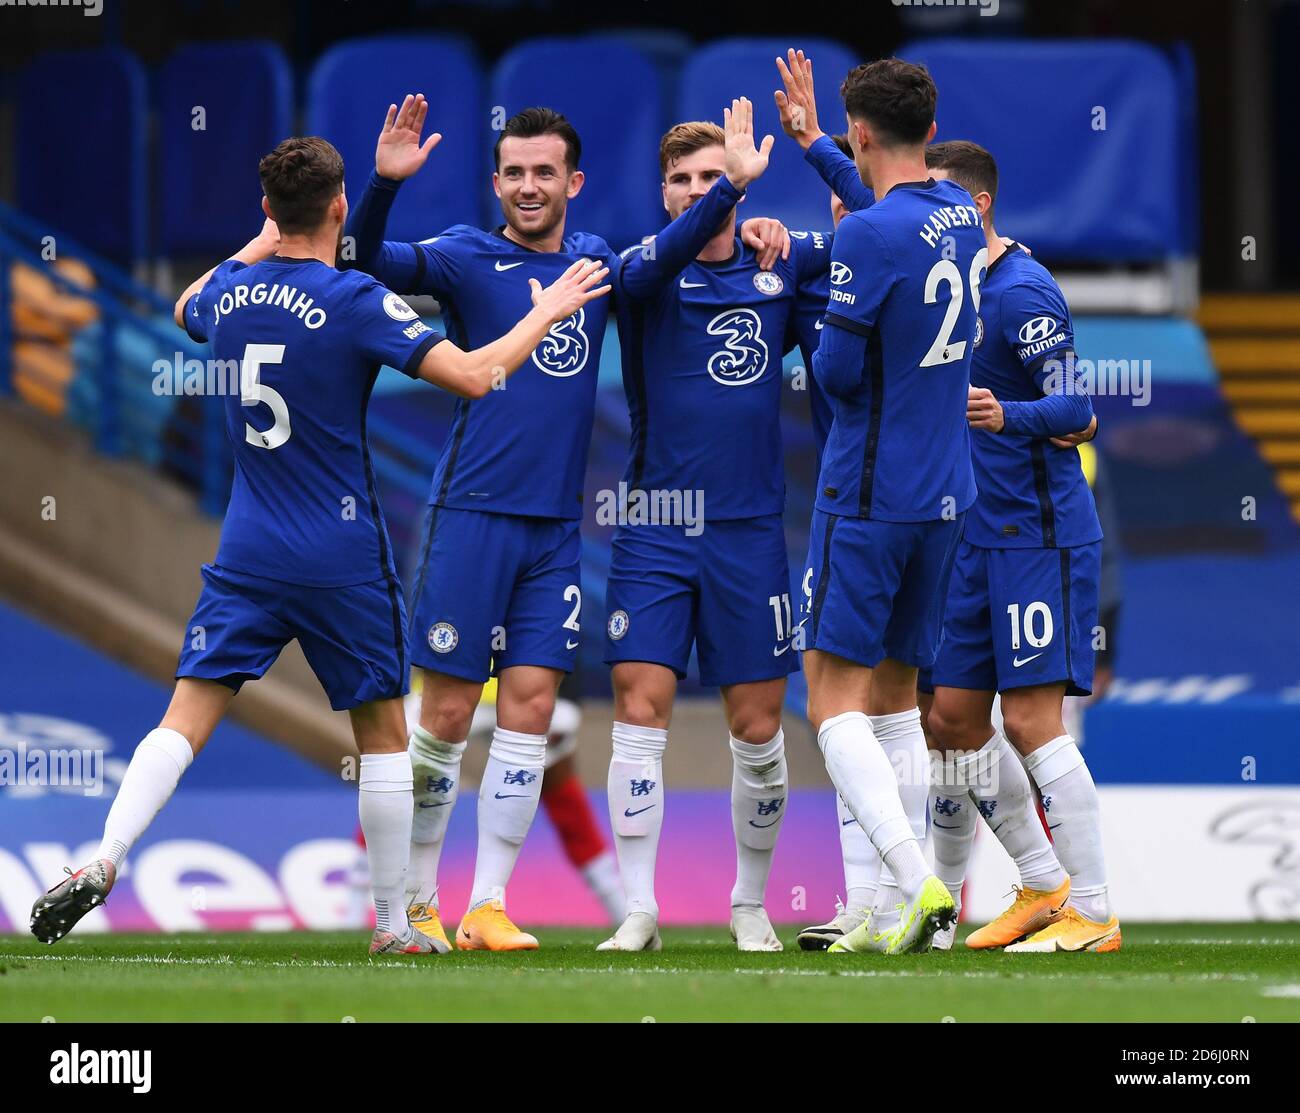 London, England, 17th Oct 2020  Timo Werner celebrates his goal during the Premier League match at Stamford Bridge, London.  Chelsea v Southampton.  Premier League. Credit : Mark Pain / Alamy Live News Stock Photo